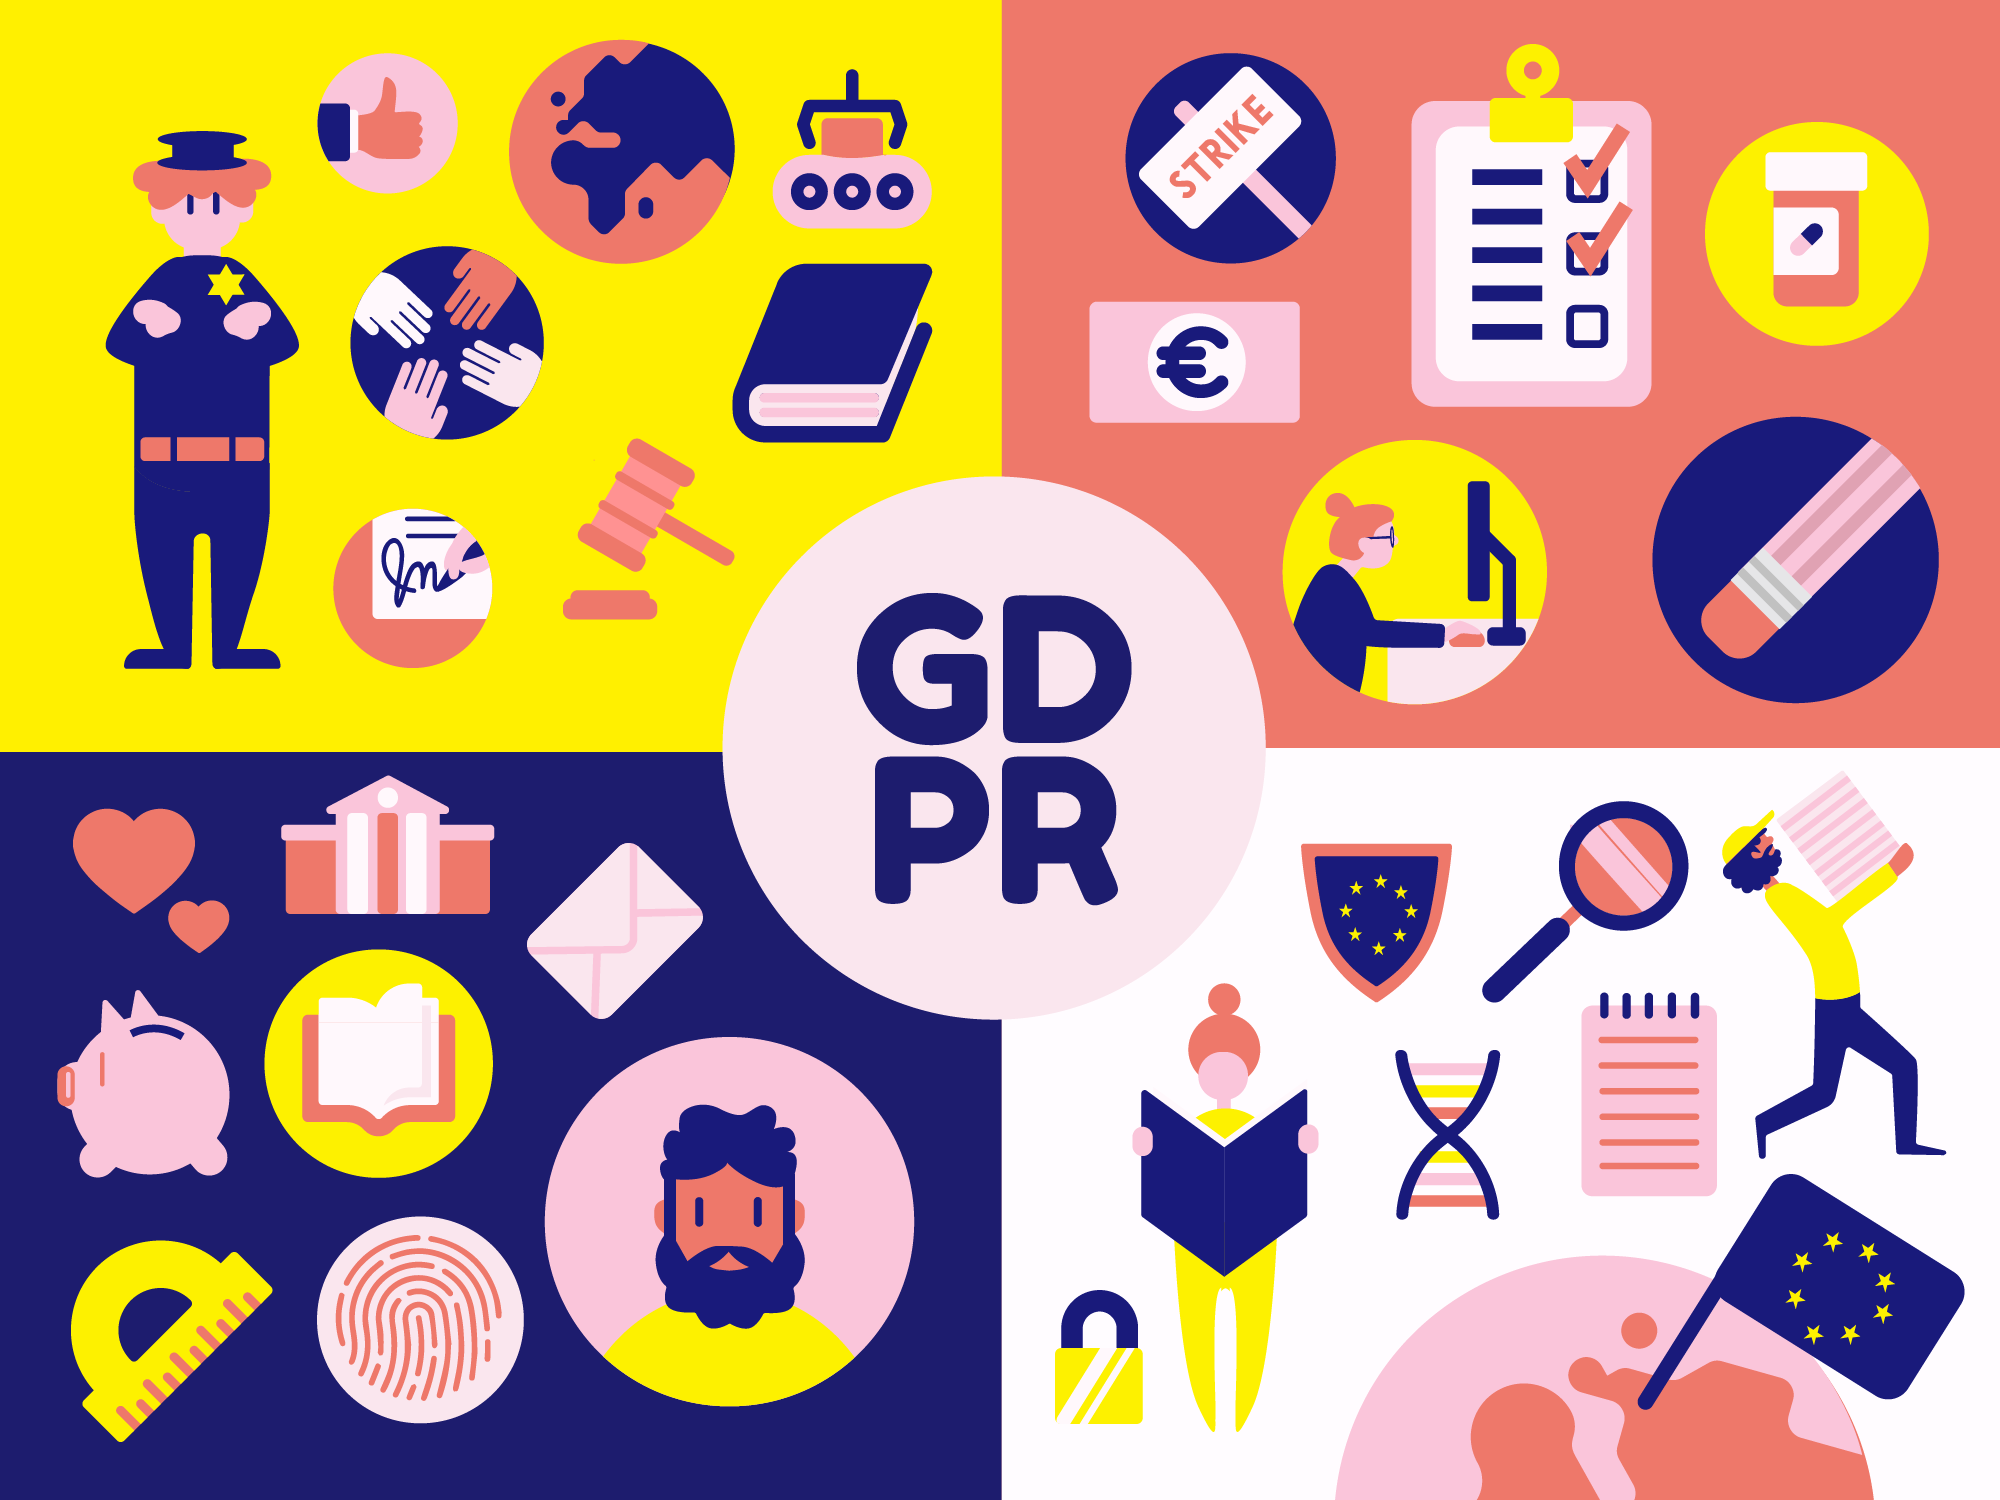 GDPR is here: how to communicate corporate changes effectively